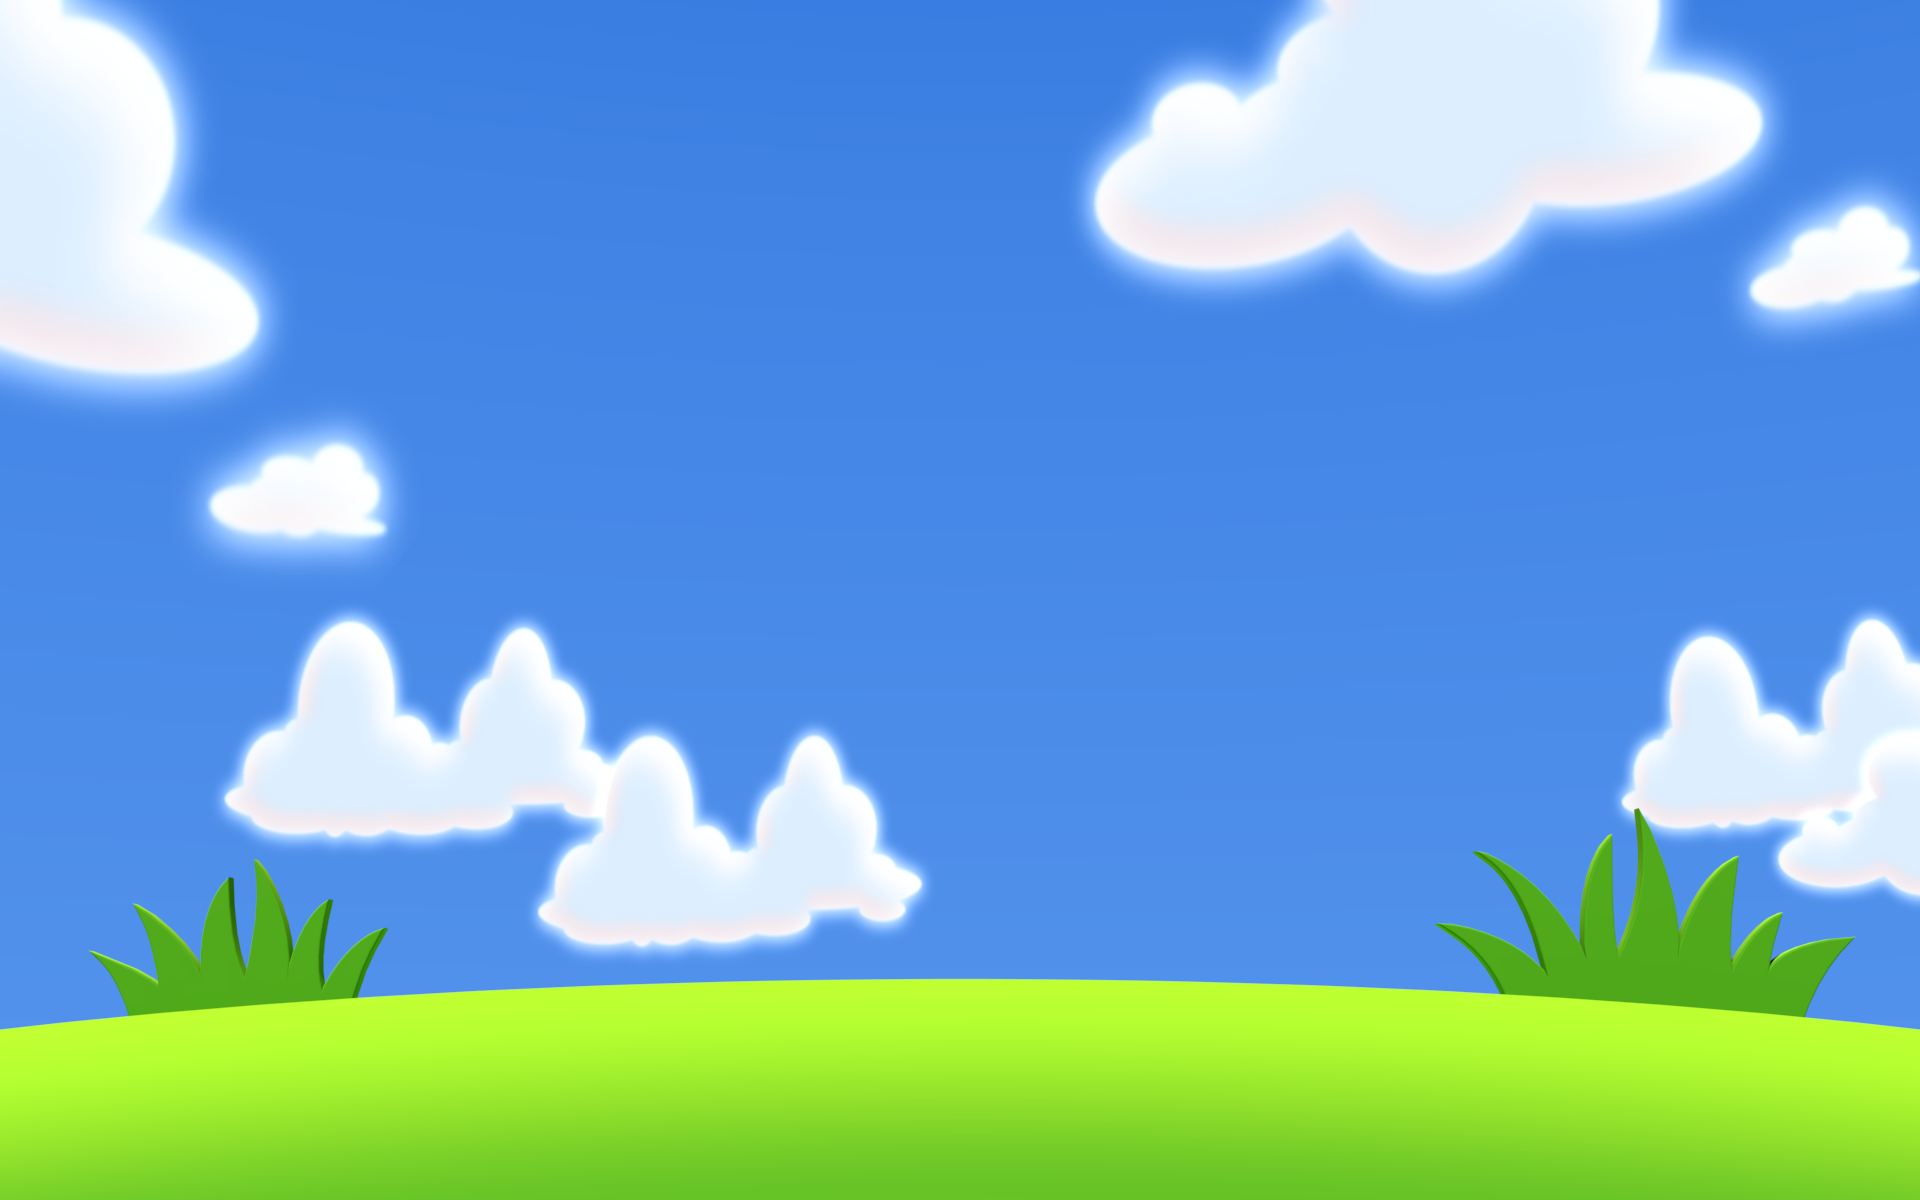 background clipart vector - photo #5